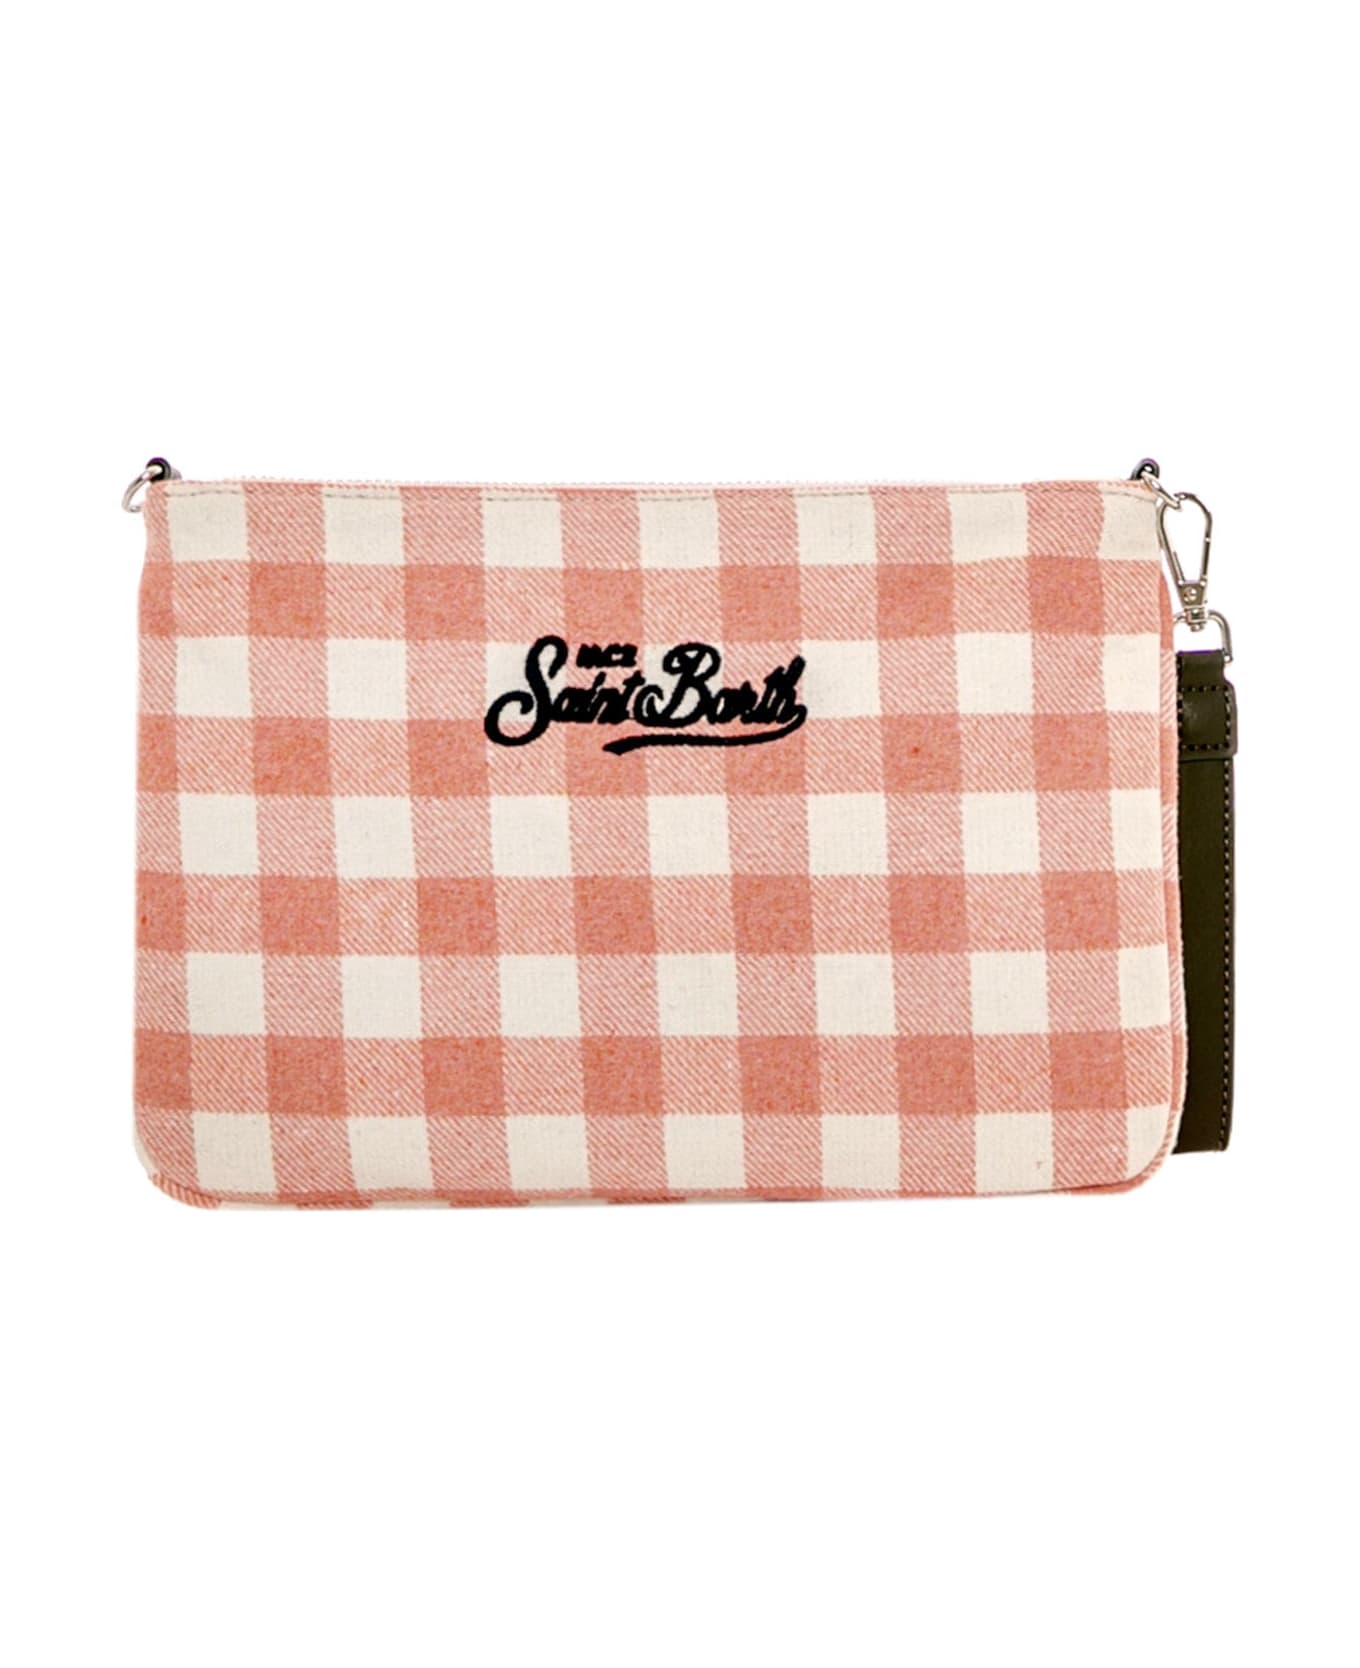 MC2 Saint Barth Parisienne Pink Gingham Wooly Cross-body Pouch Bag - PINK トラベルバッグ